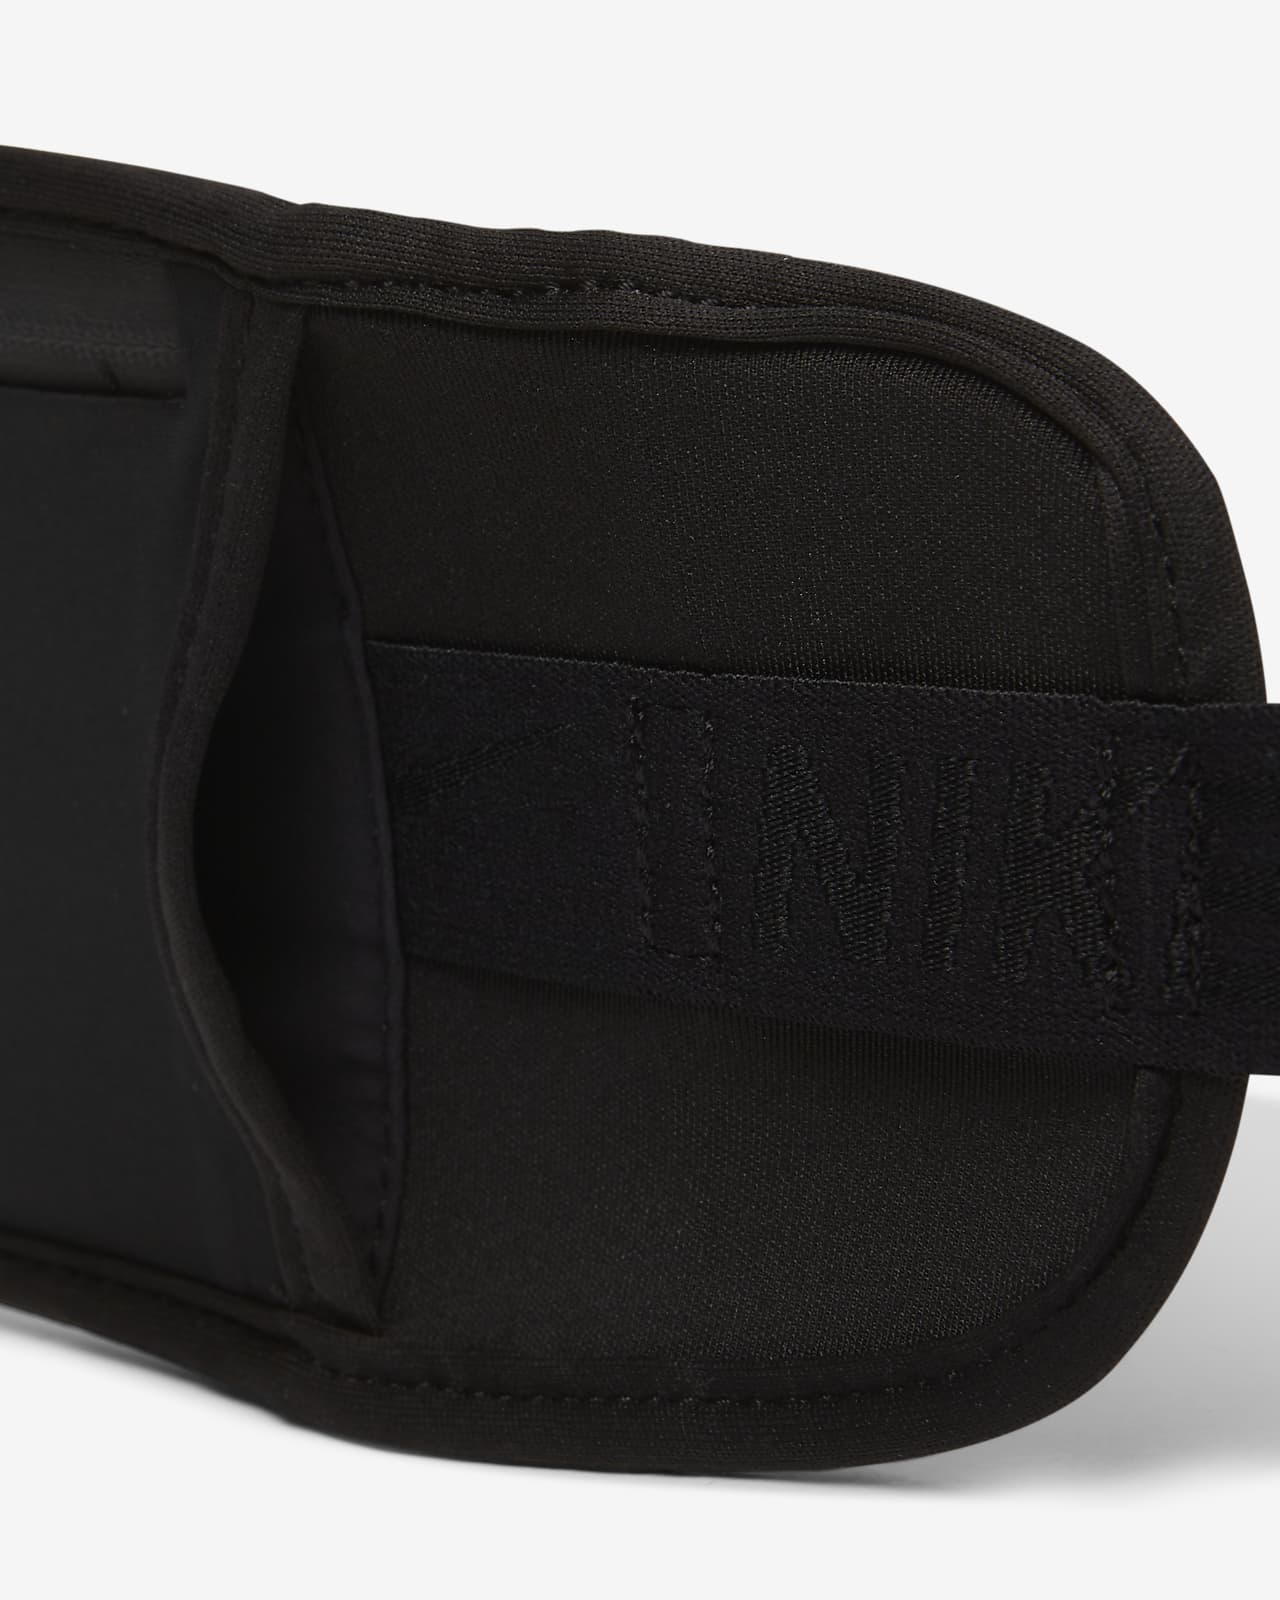 Nike Challenger 2 Running Fanny Pack (Small, 500 mL)